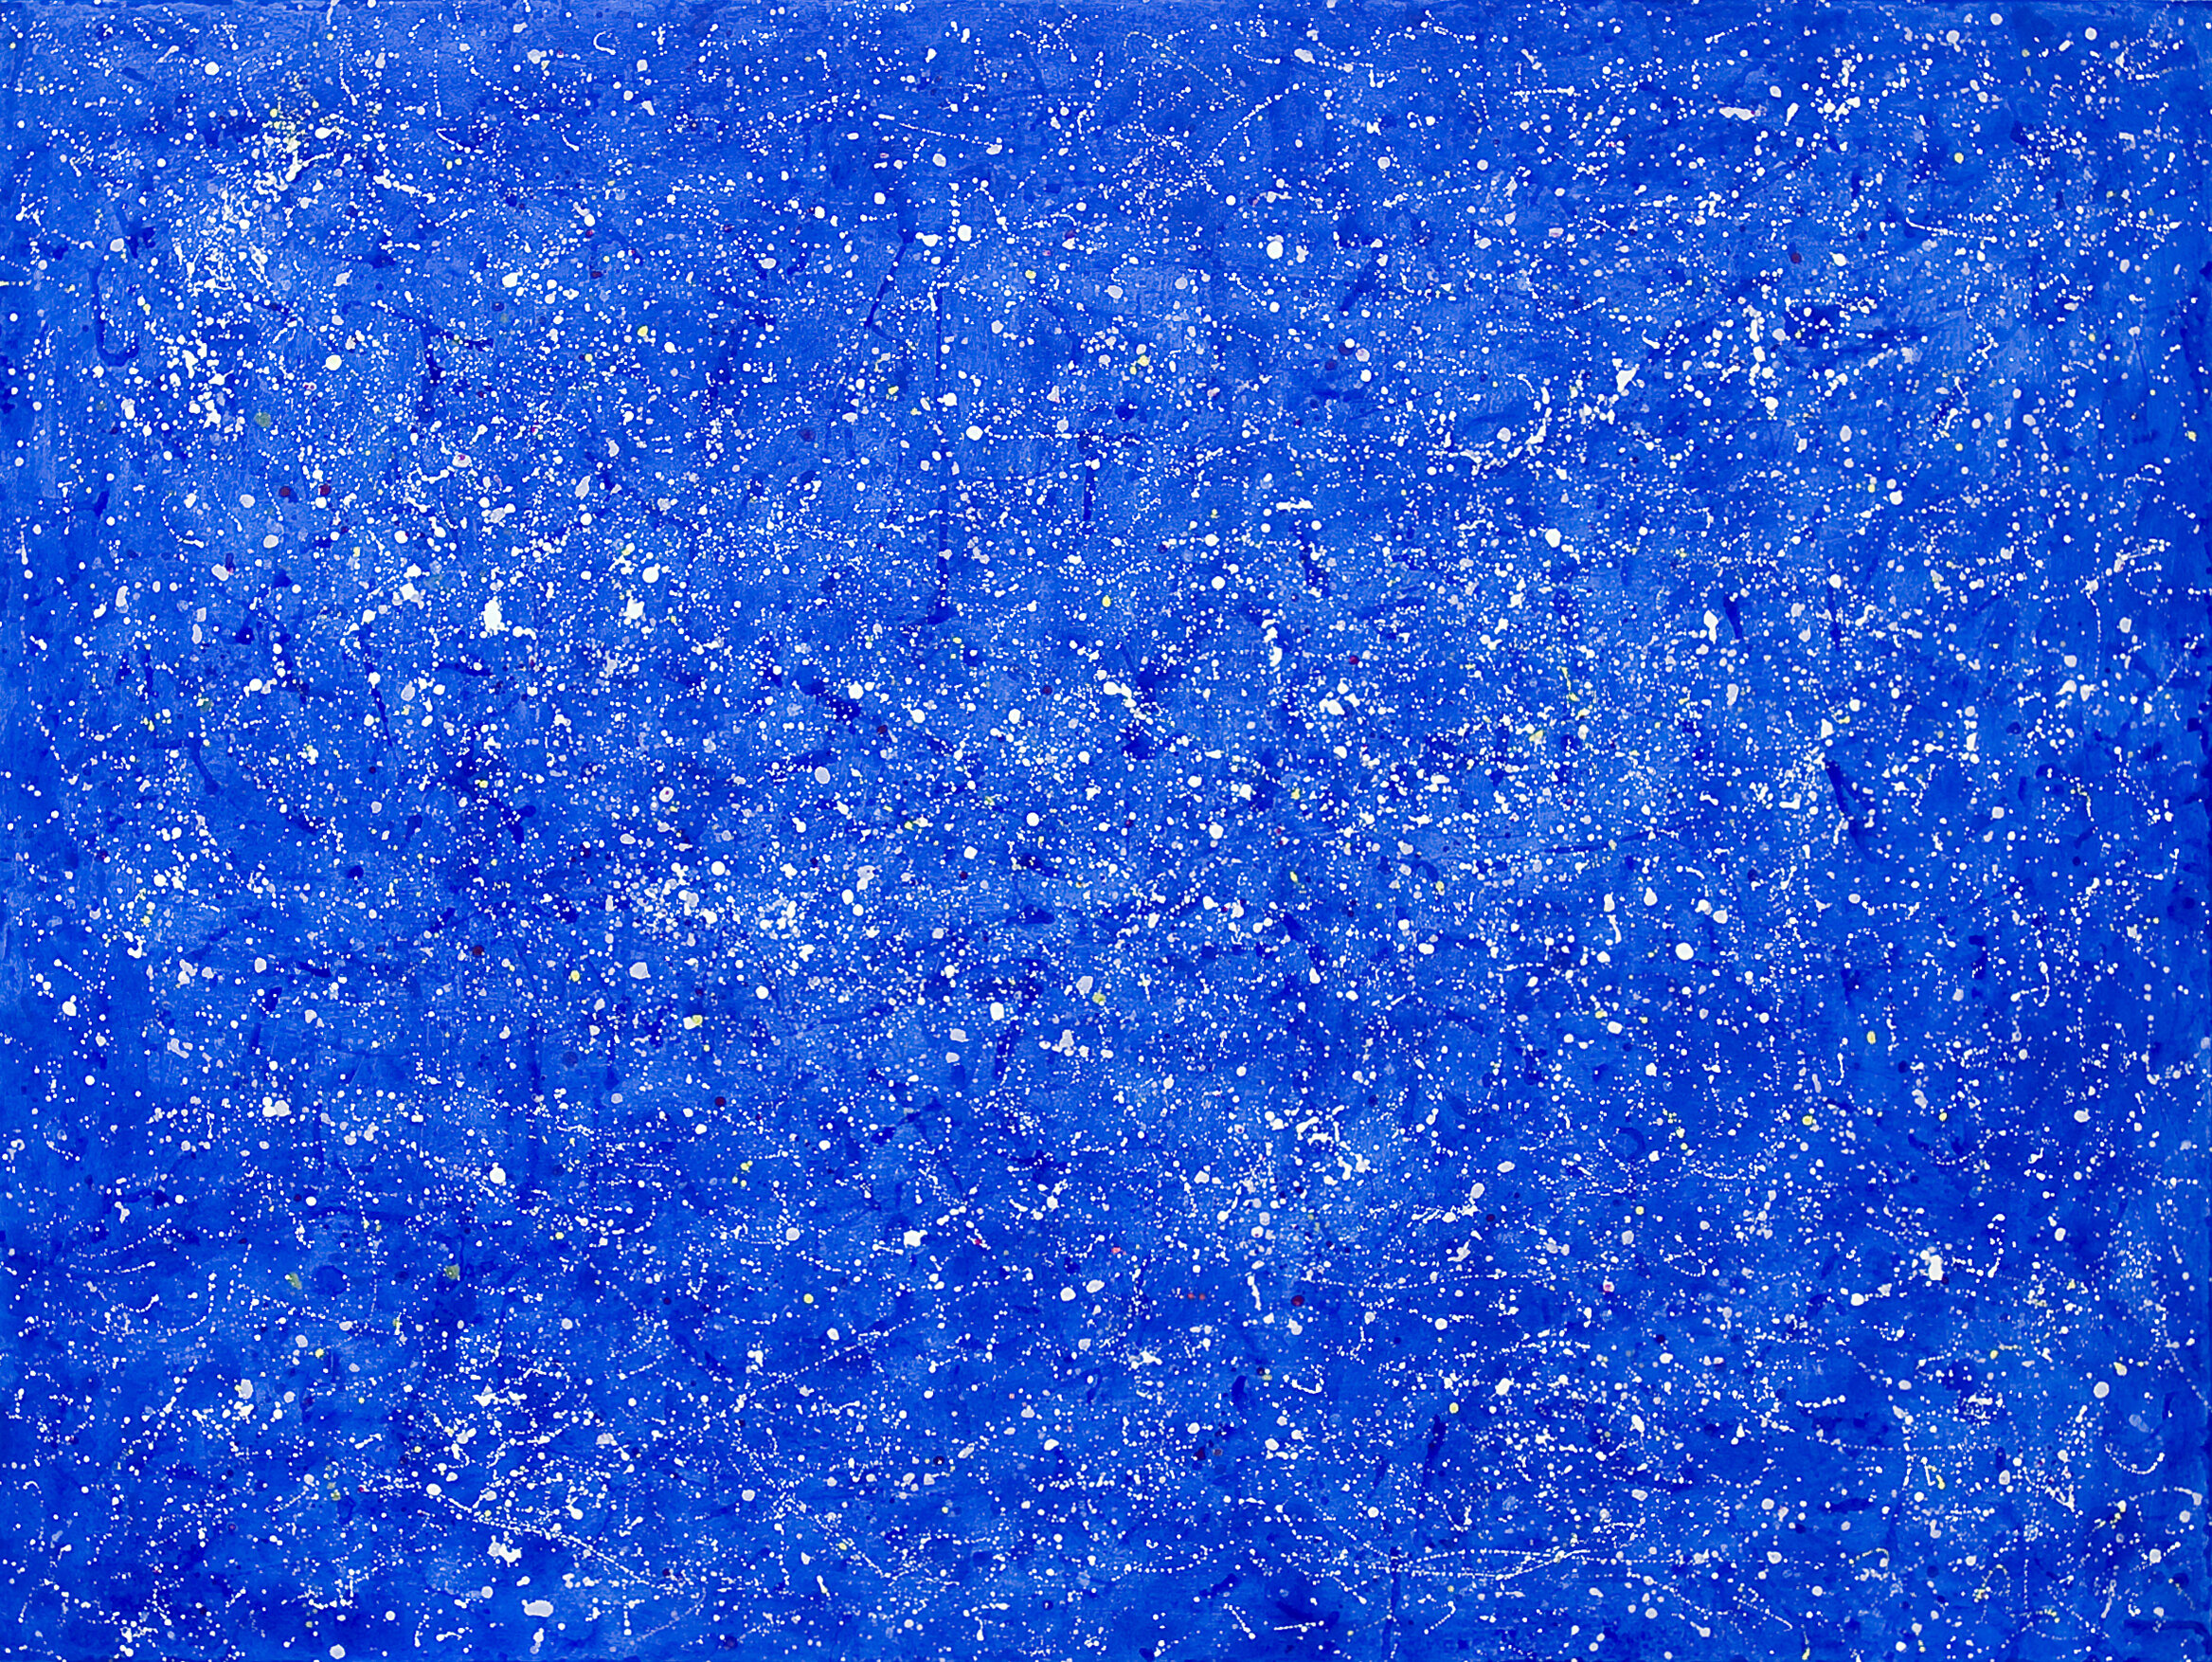   Endlessness , 2008, acrylic on canvas, 72 x 96 inches. Private Collection, Sacramento 